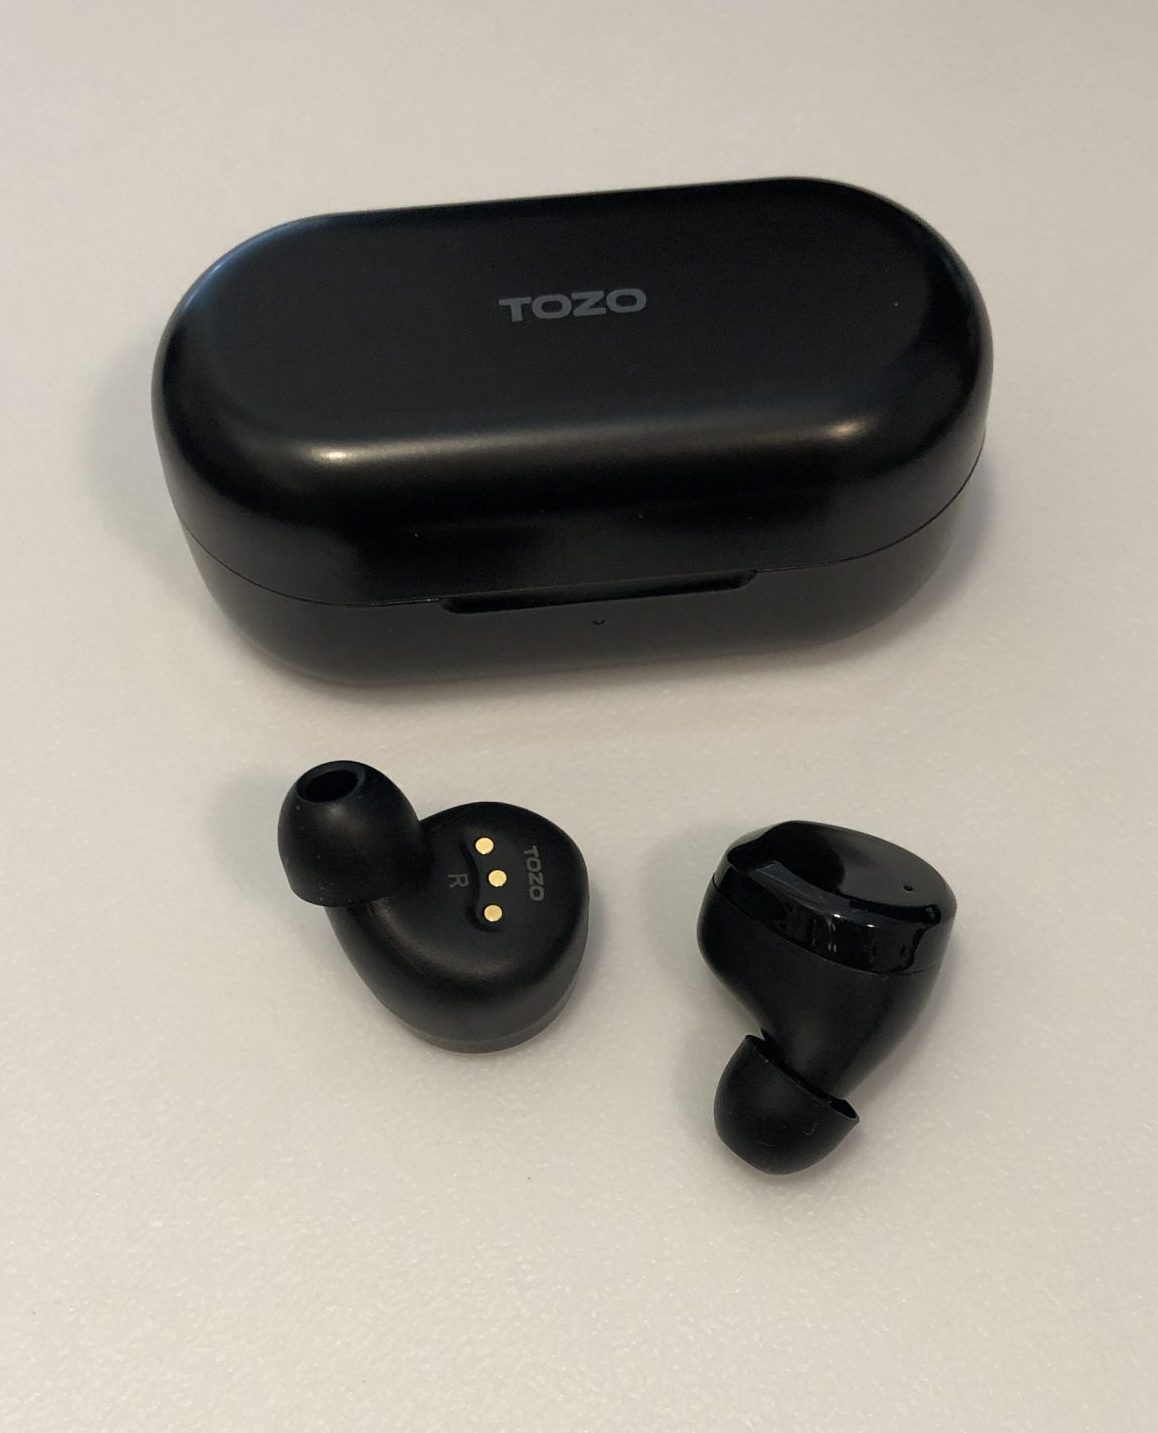 TOZO T12 Truly Wireless Review 